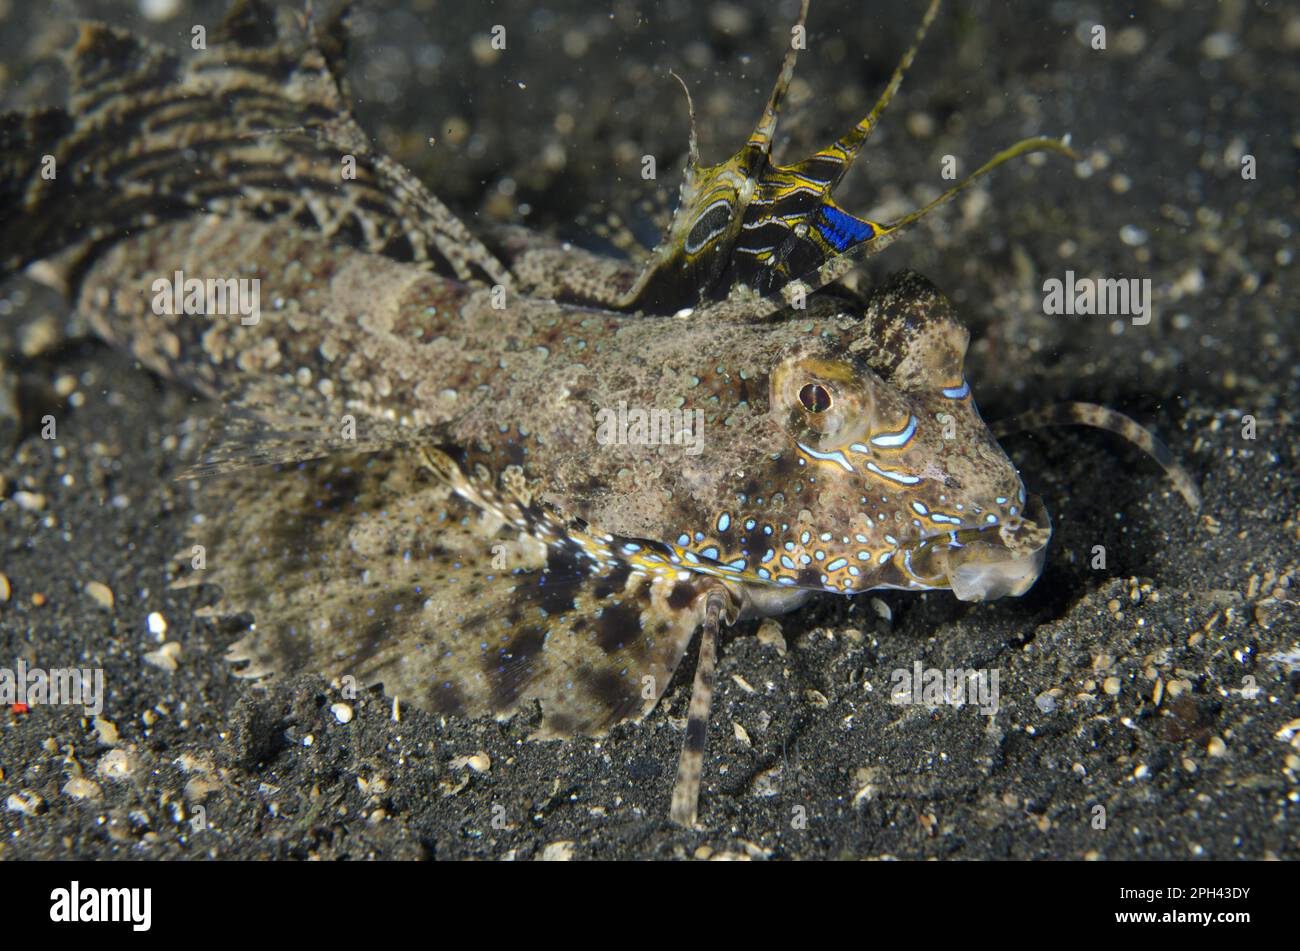 Fingered Dragonet (Dactylopus dactylopus) adult, with fins extended, resting on black sand, Lembeh Straits, Sulawesi, Greater Sunda Islands, Indonesia Stock Photo